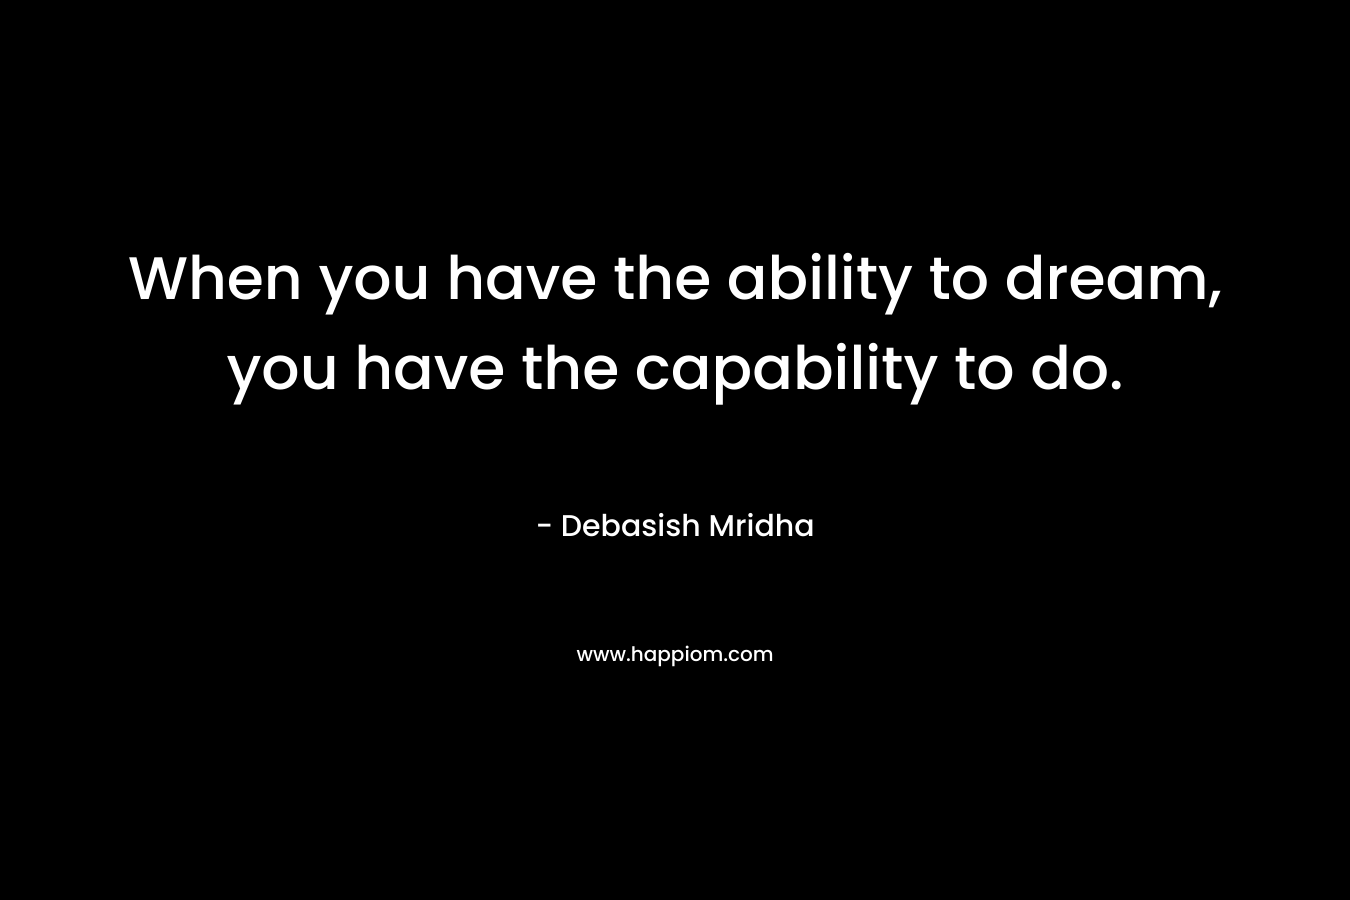 When you have the ability to dream, you have the capability to do.